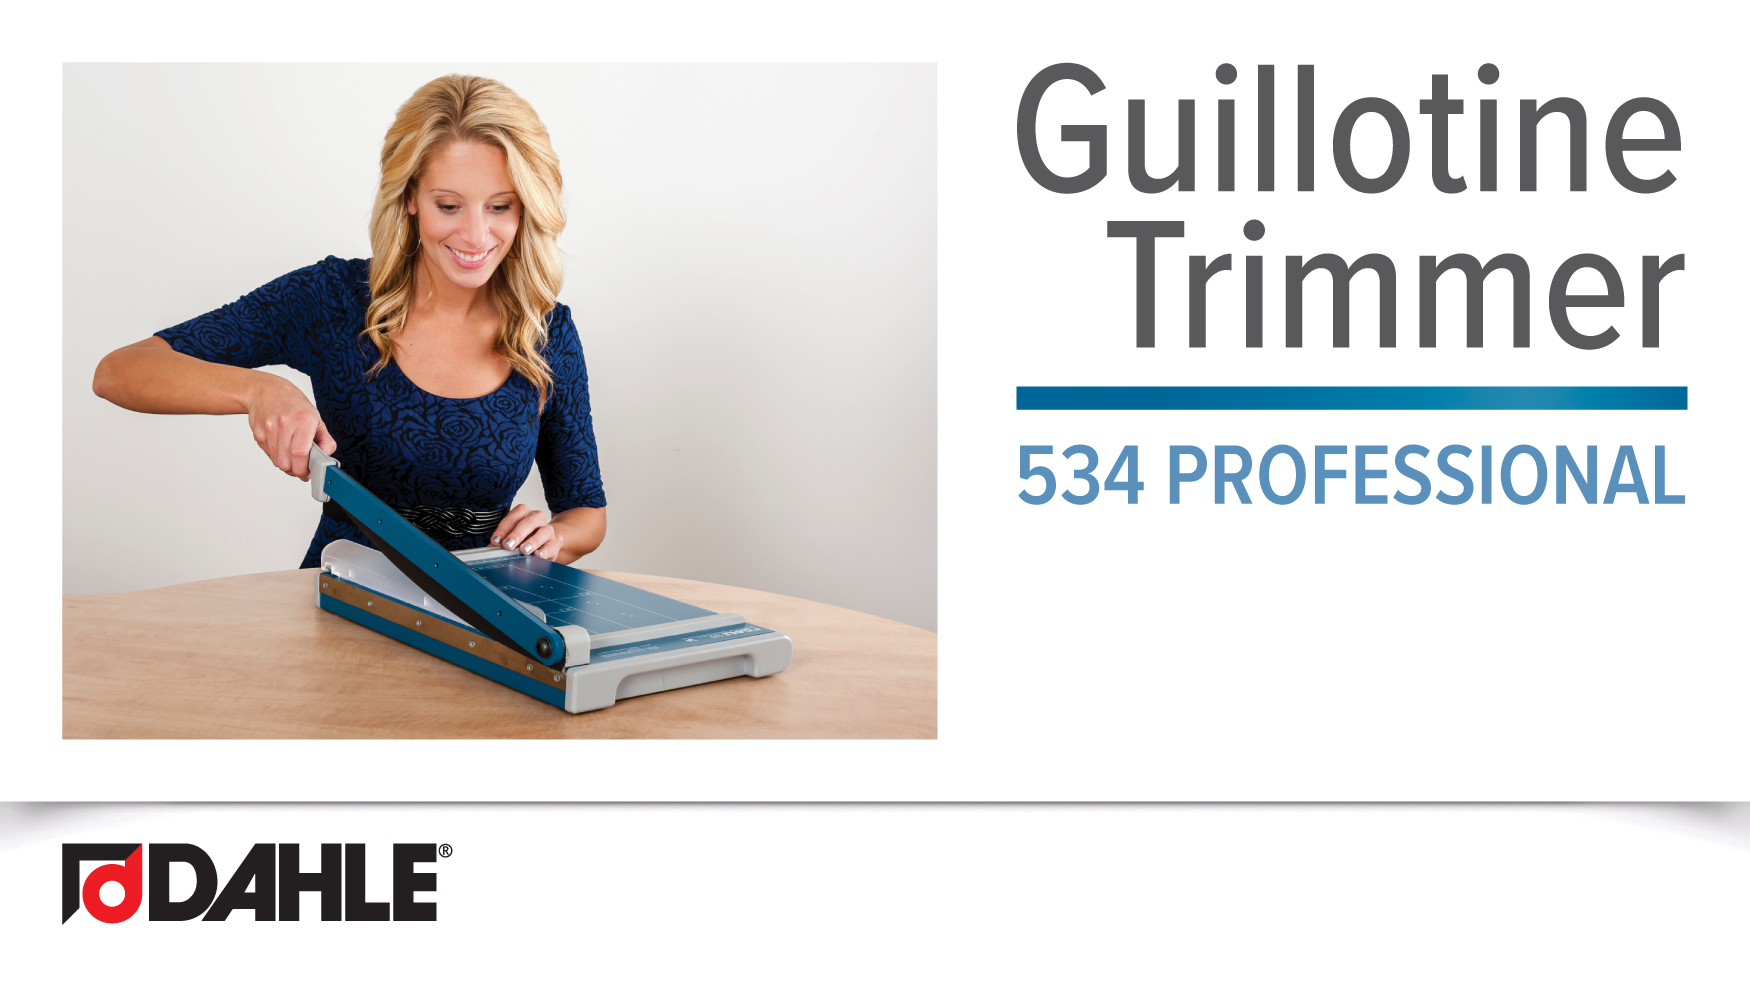 Dahle Professional Guillotine Trimmer Video